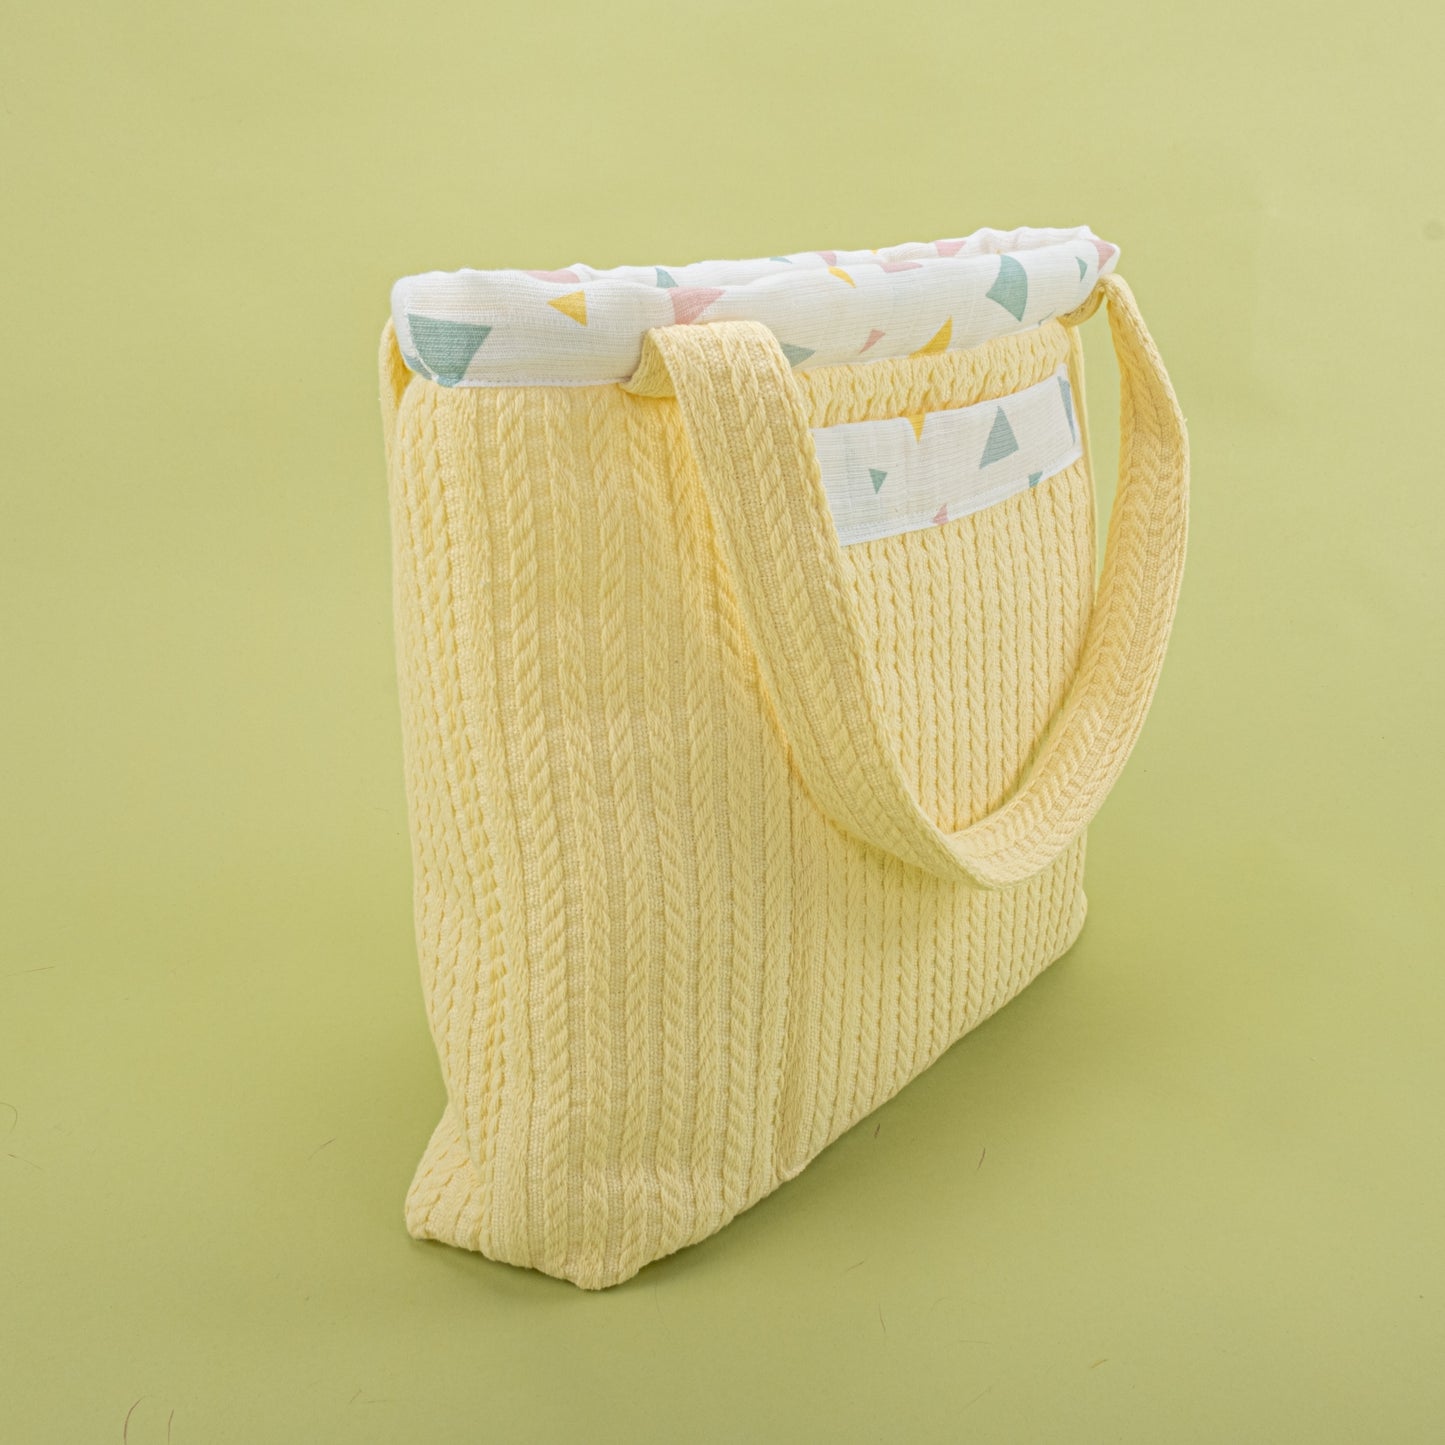 Baby Care Bag - Yellow Braid - Colored Triangles